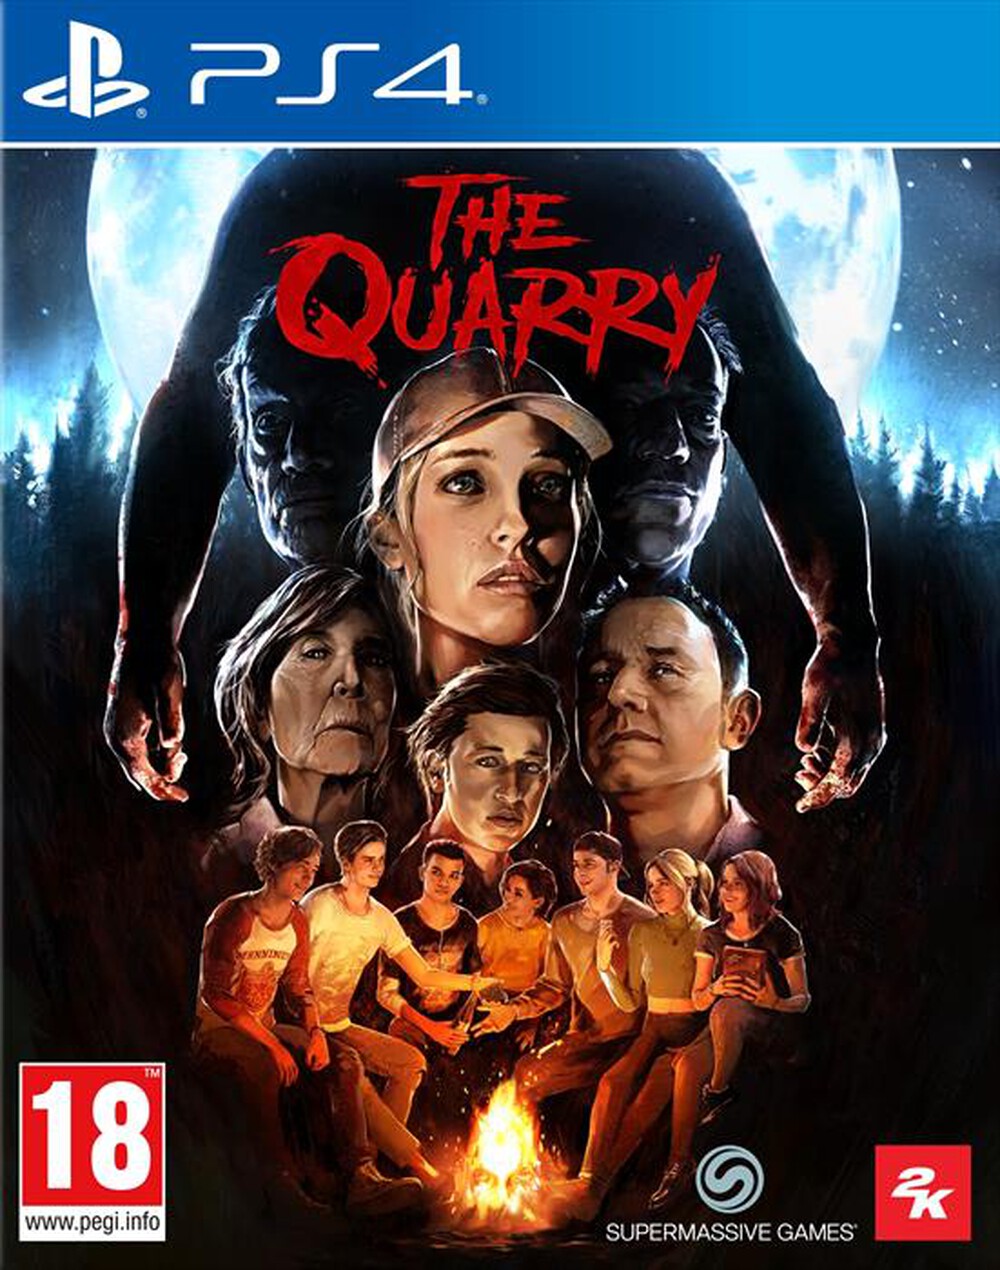 "2K GAMES - THE QUARRY PS4"